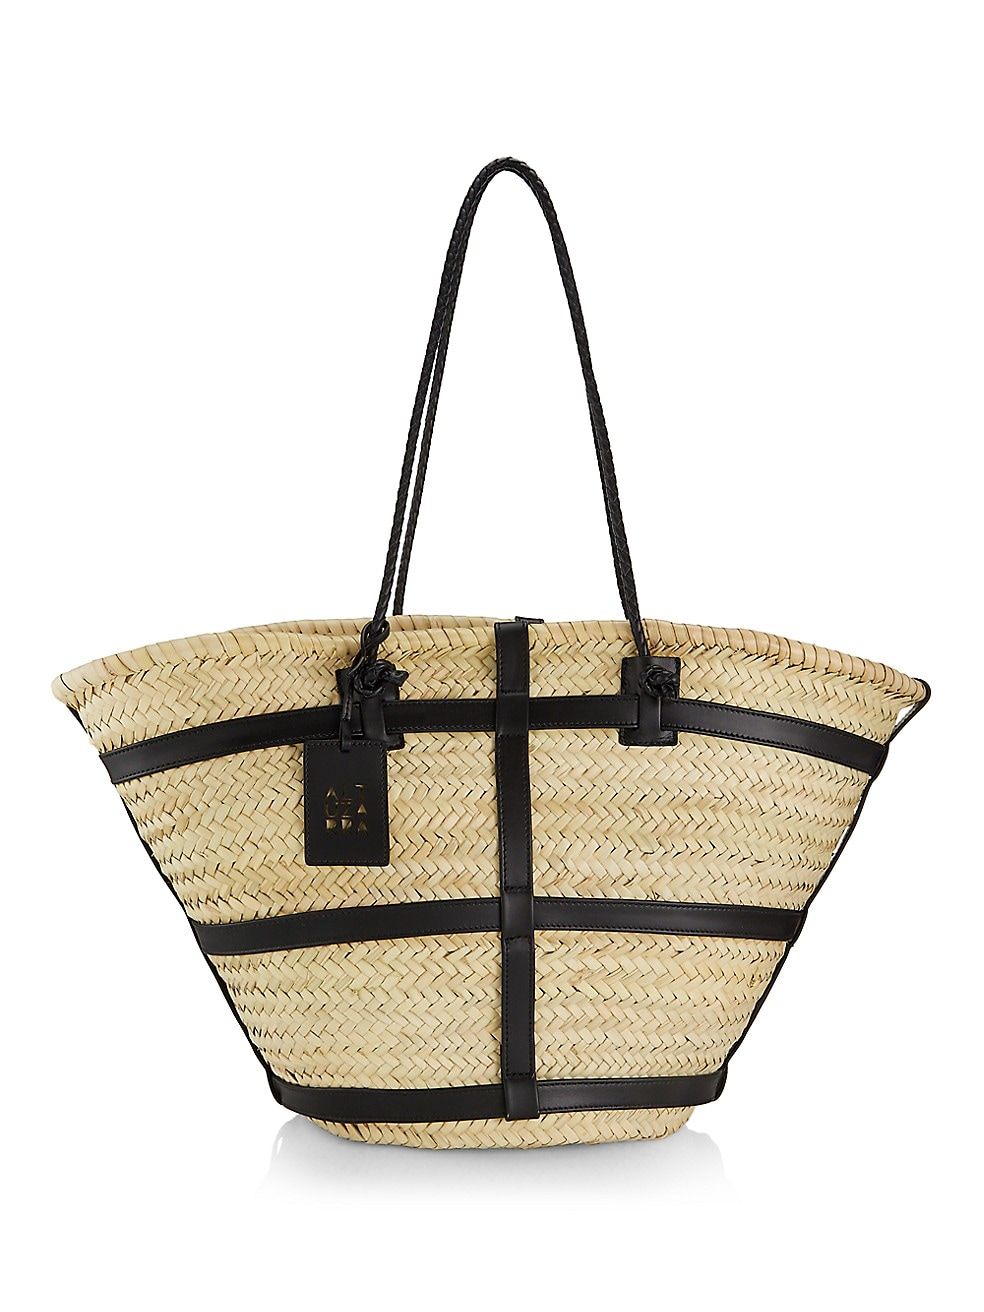 Watermill Leather-Trimmed Straw Tote | Saks Fifth Avenue